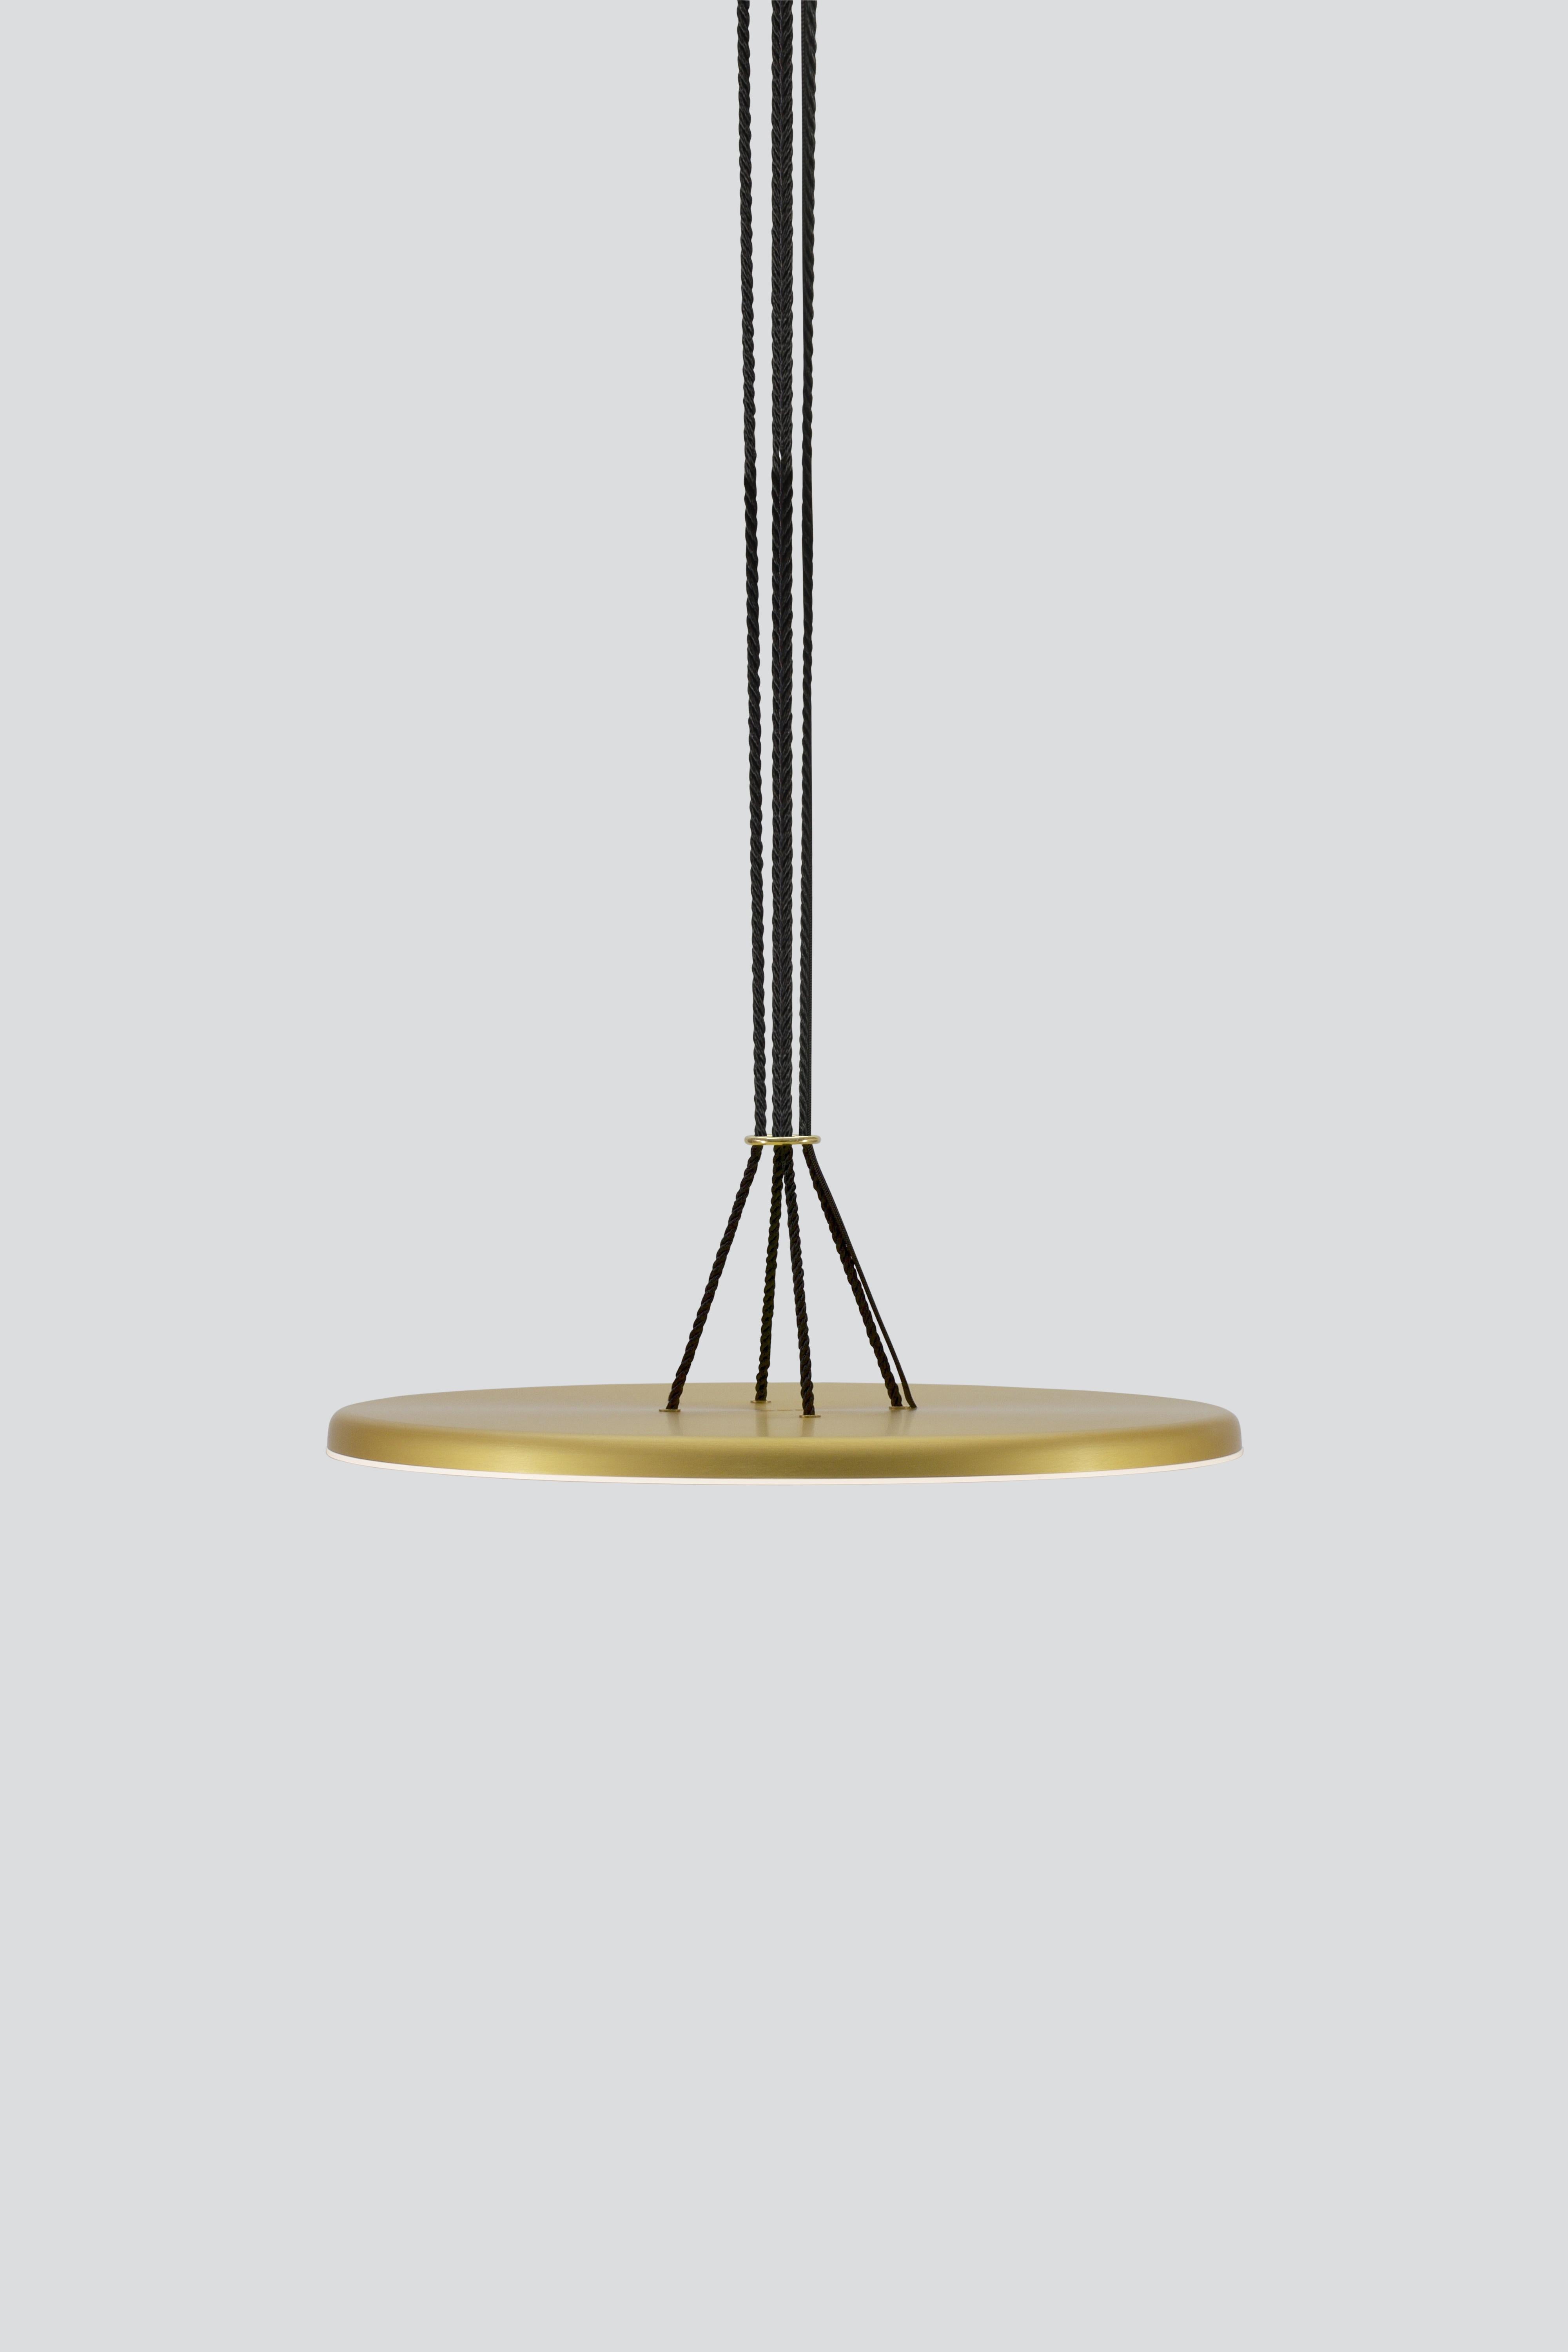 Canadian Contemporary Gold Pendant Lamp 'Button' For Sale